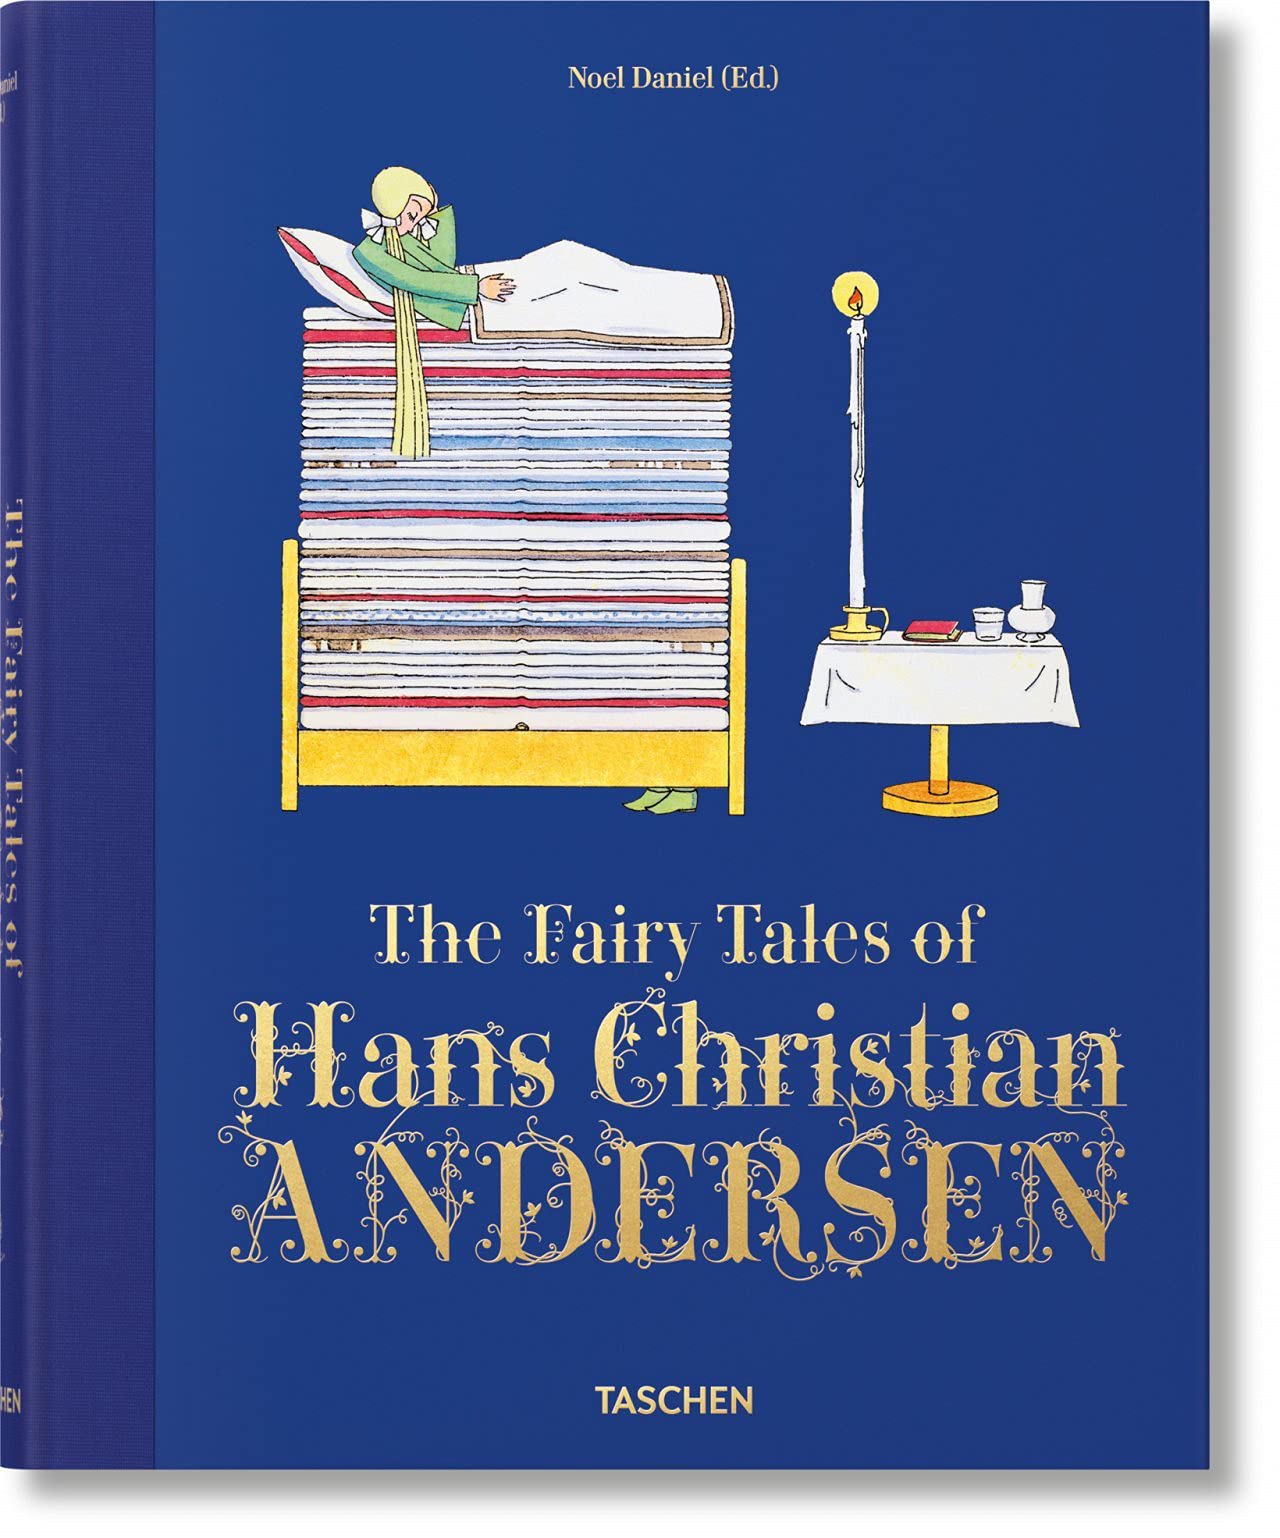 The Fairy Tales of Hans Christian Andersen | Hans Christian Andersen, Noel Daniel image16